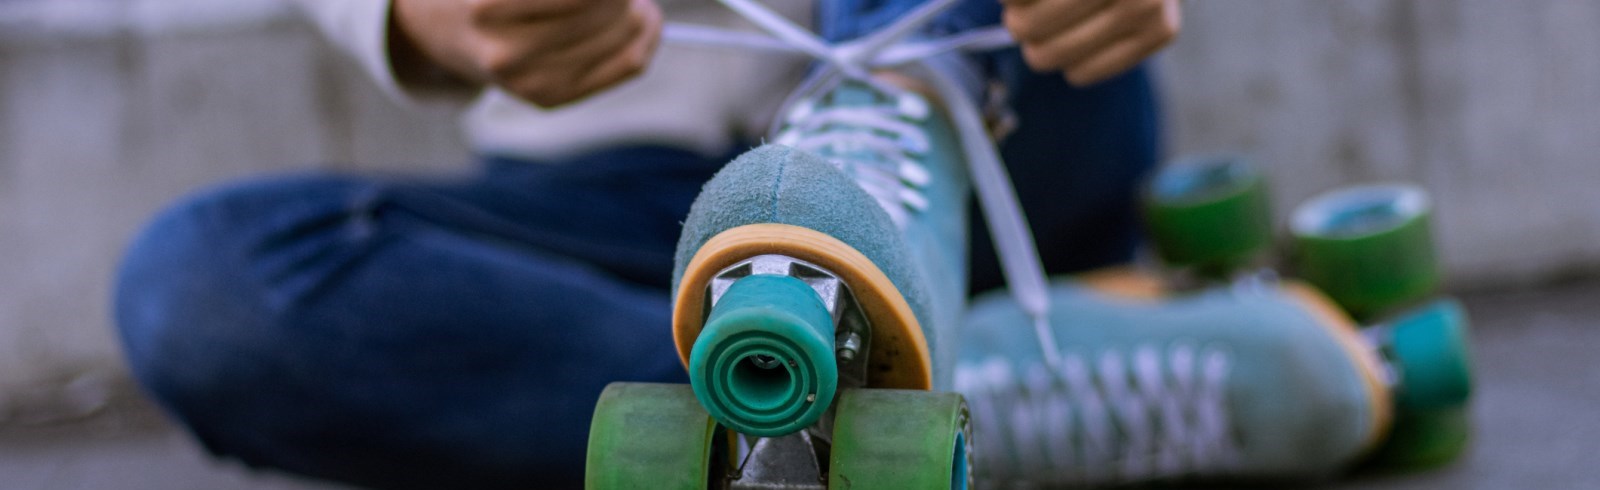 person tying up their roller skates